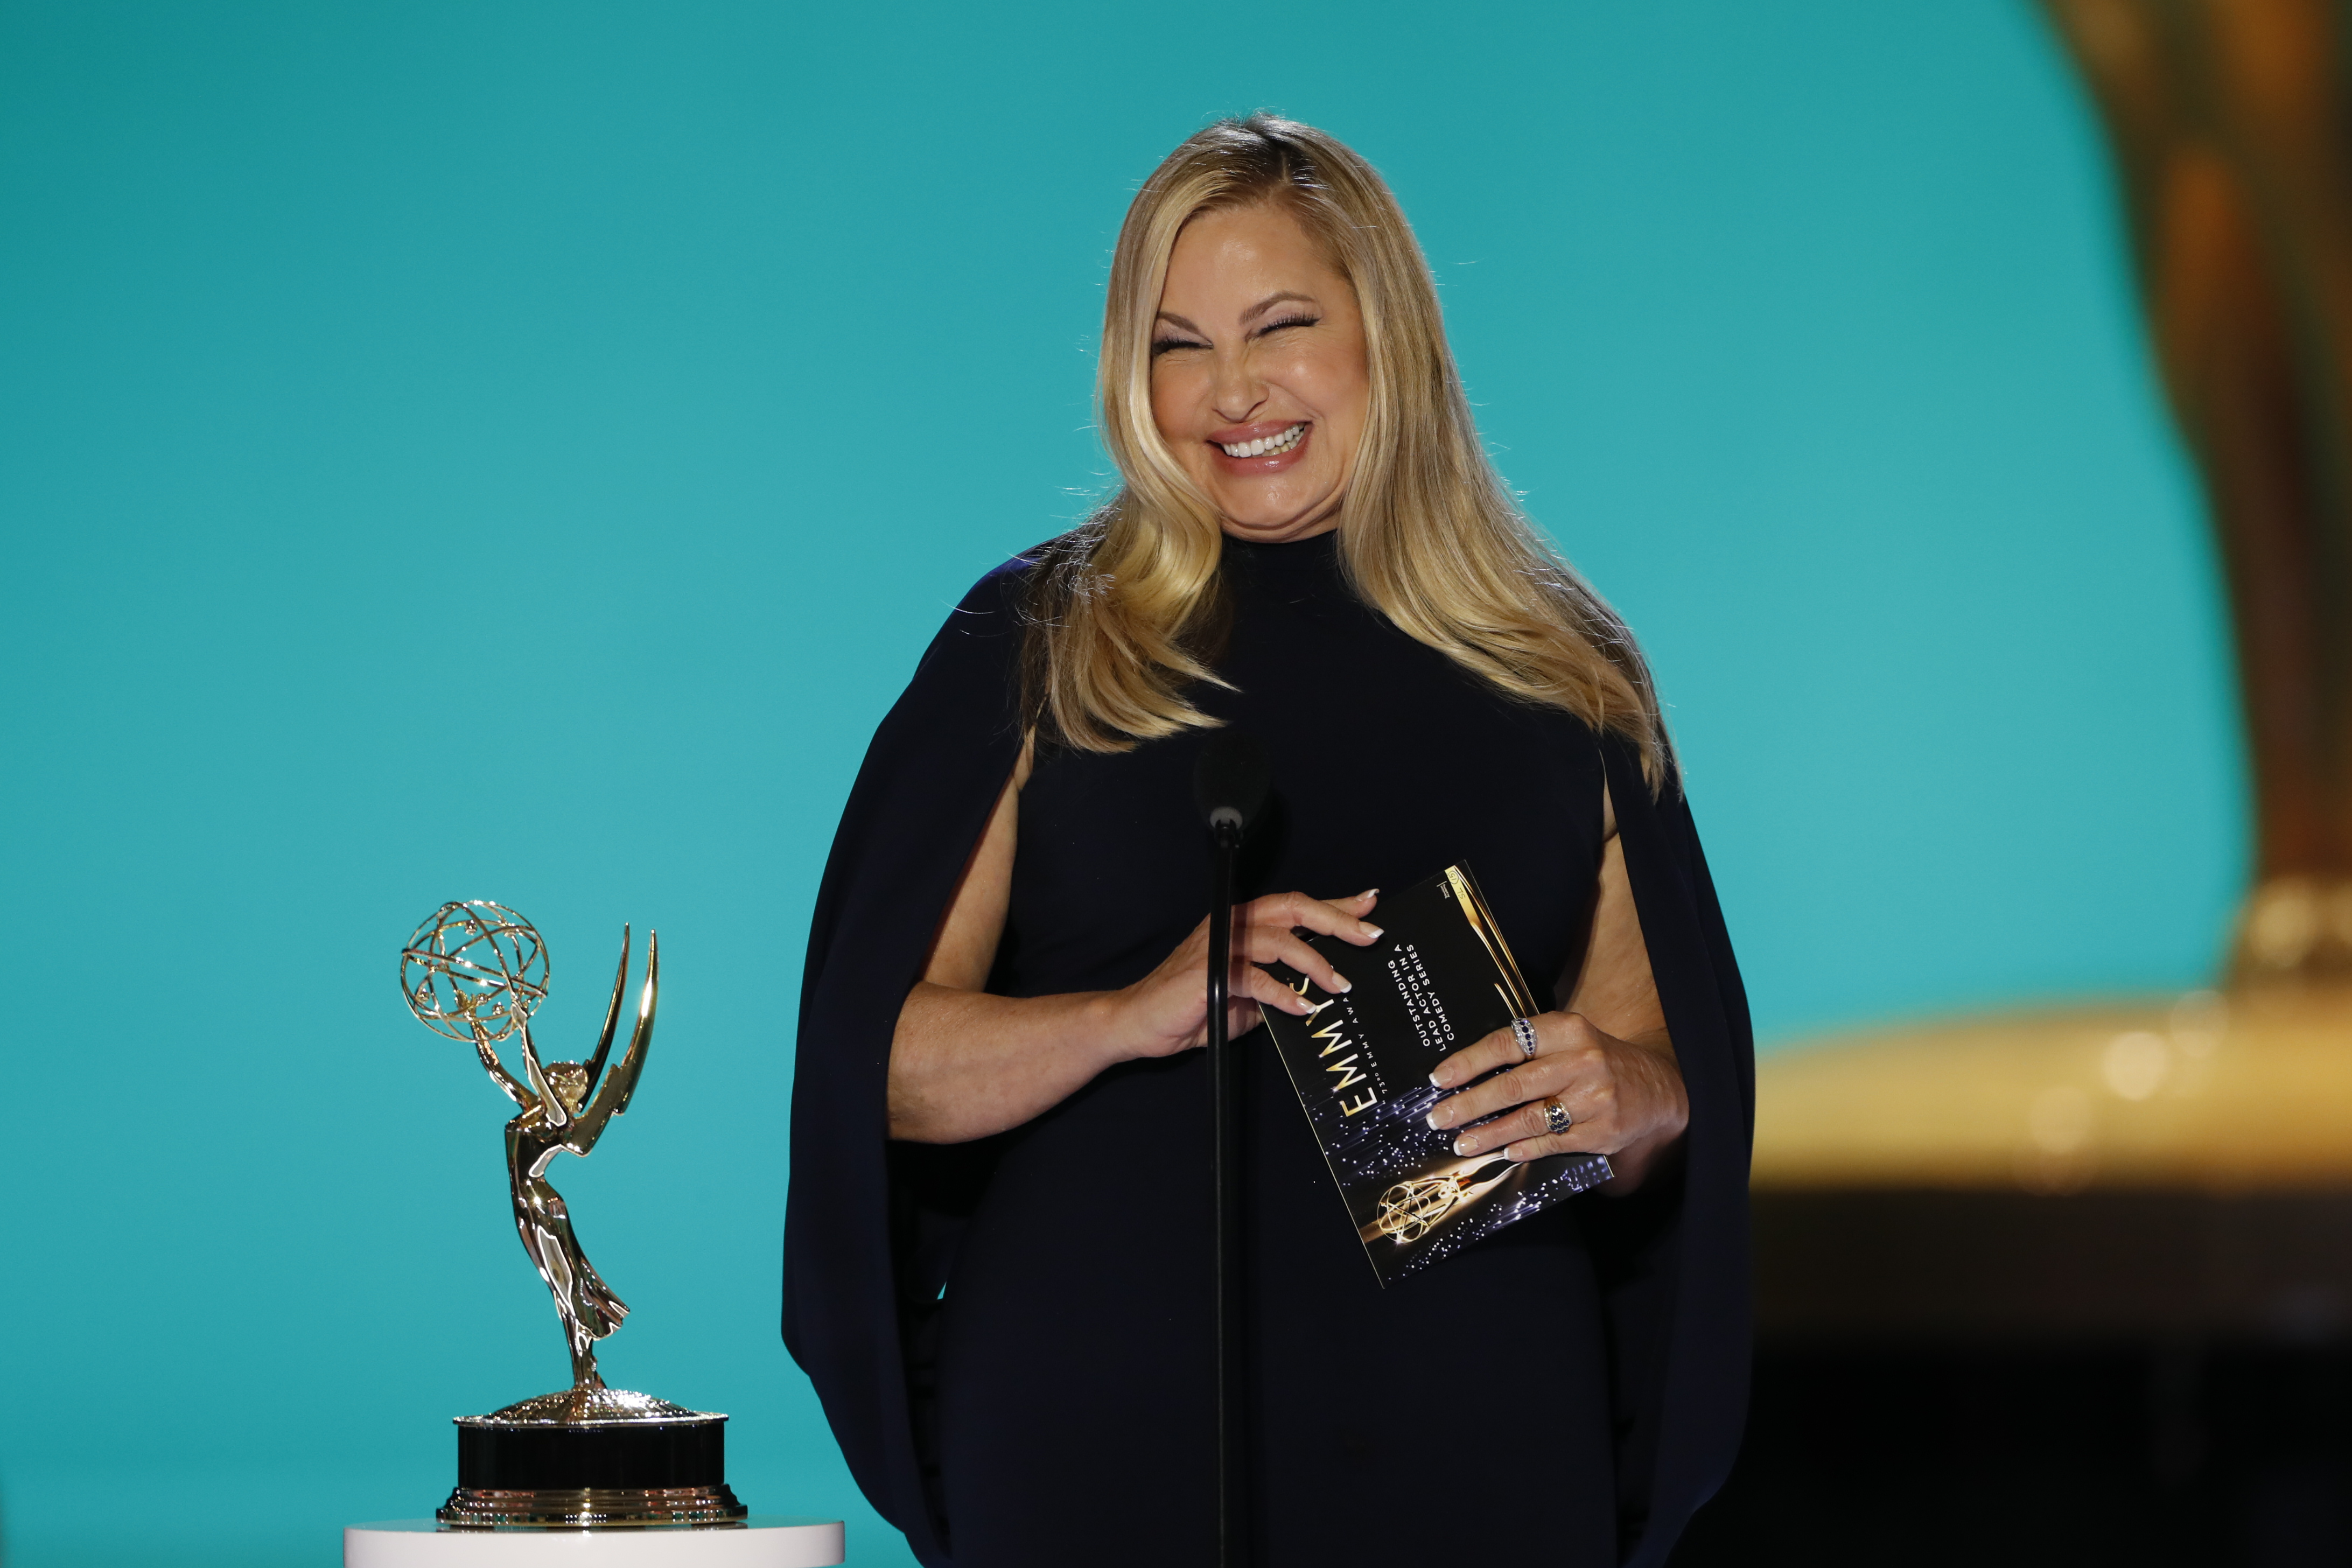 Jennifer Coolidge presents at the 2021 Emmys. (Cliff Lipson—CBS/Getty Images)